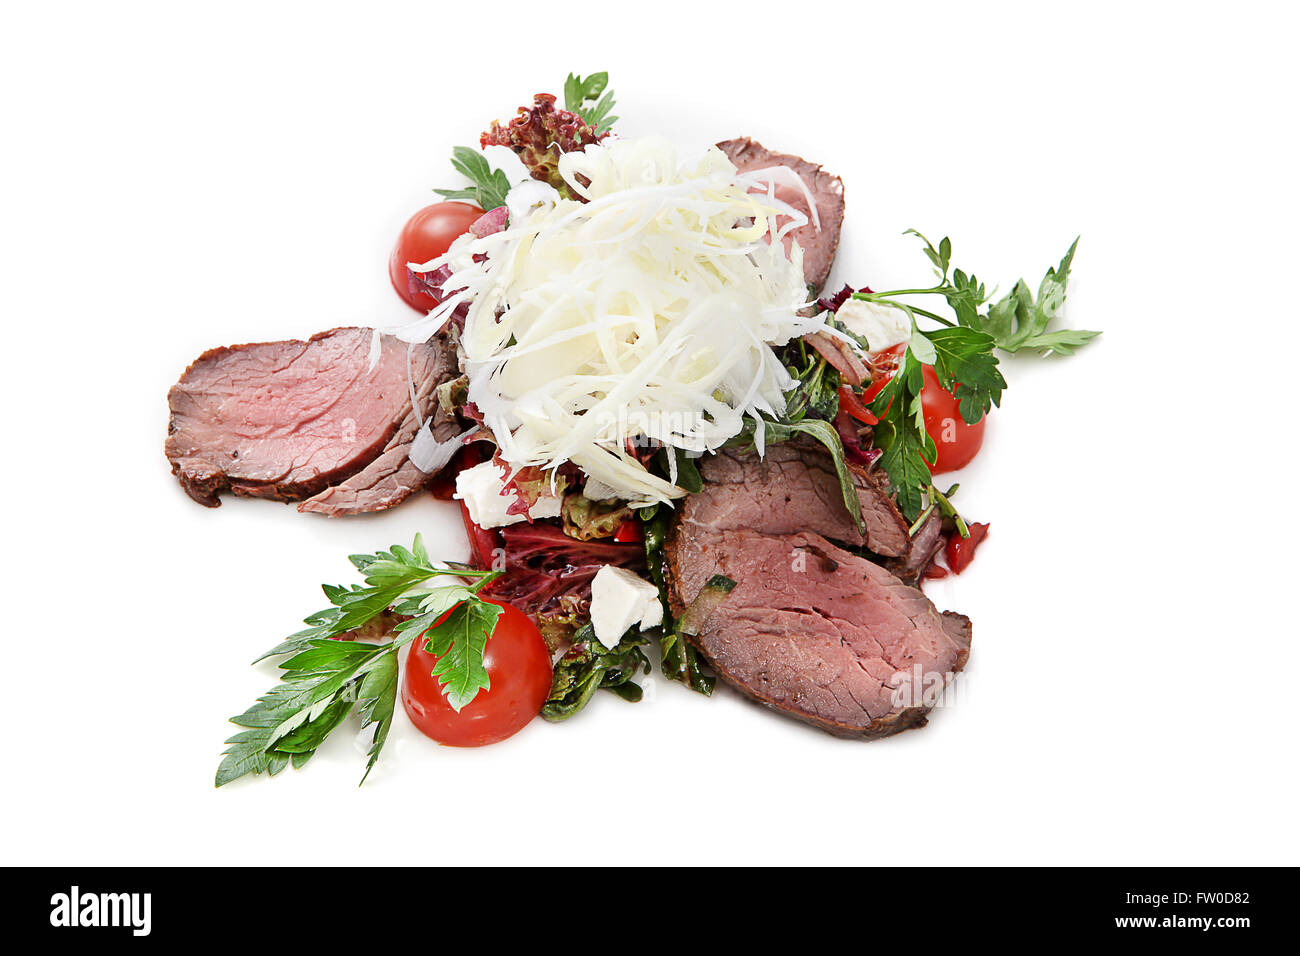 Vegetables salad with roast beef Stock Photo